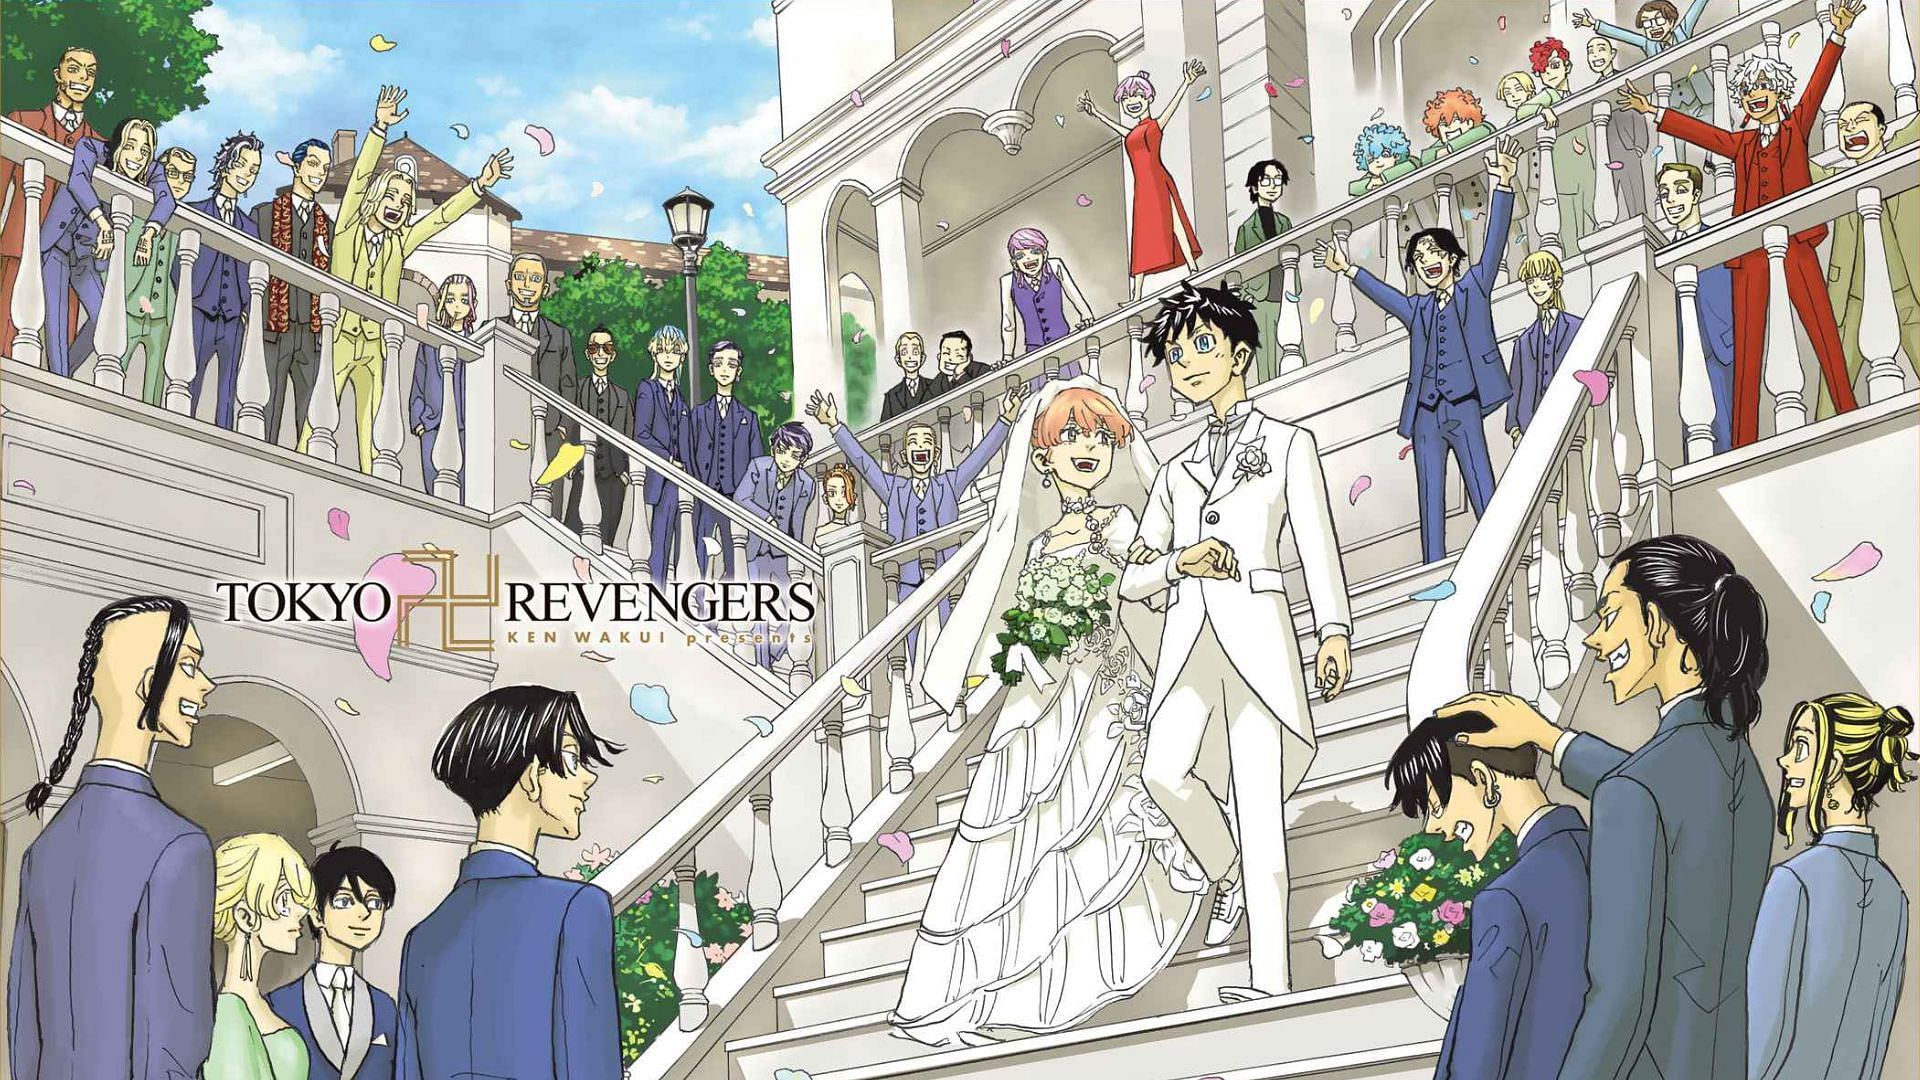 Tokyo Revengers Manga Officially Ends After 278 Chapters